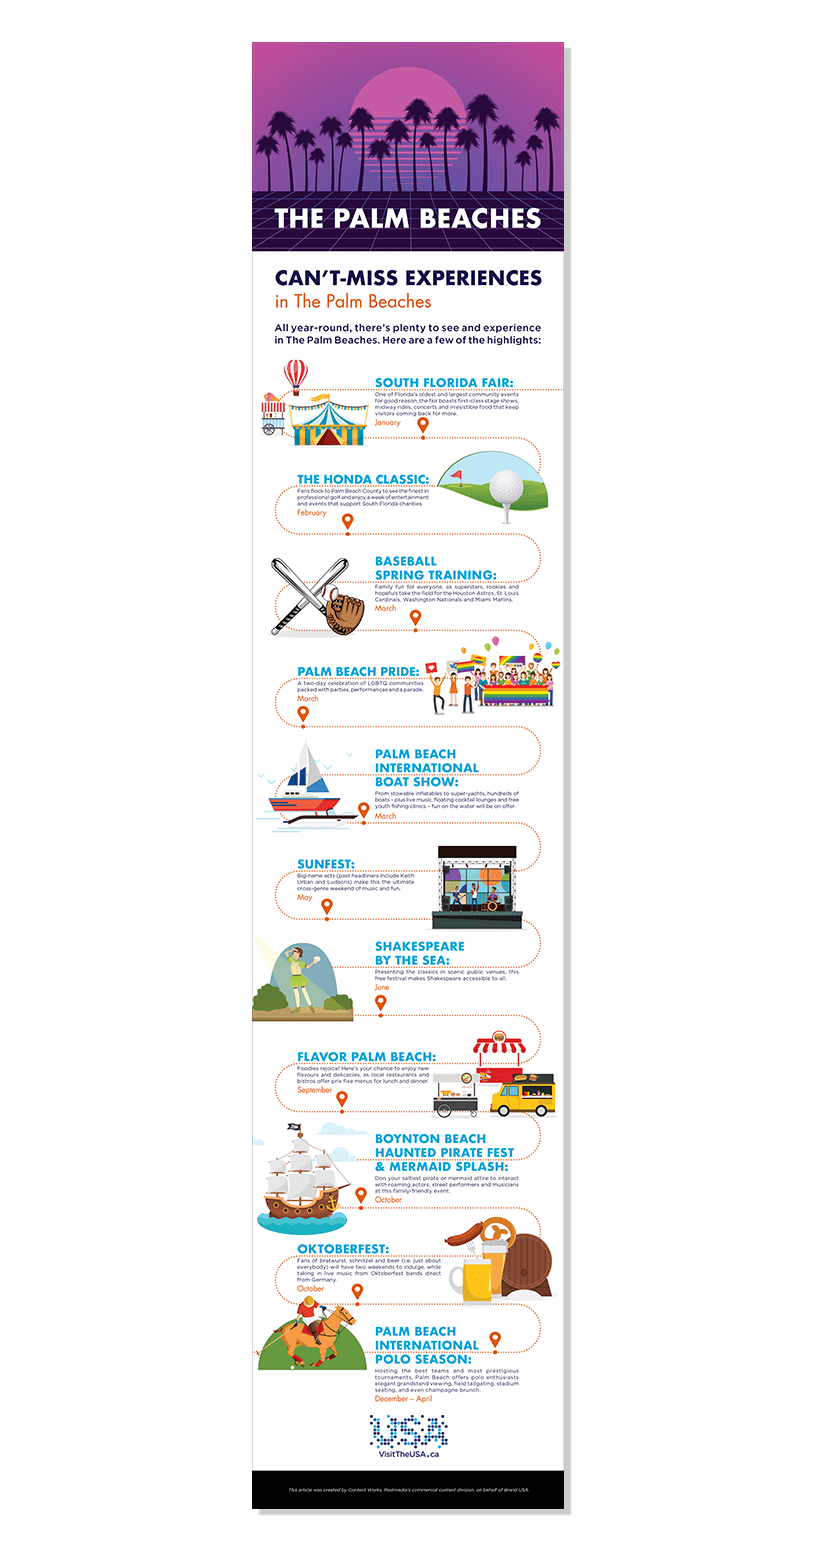 Palm Beach sponsored content shown as an infographic